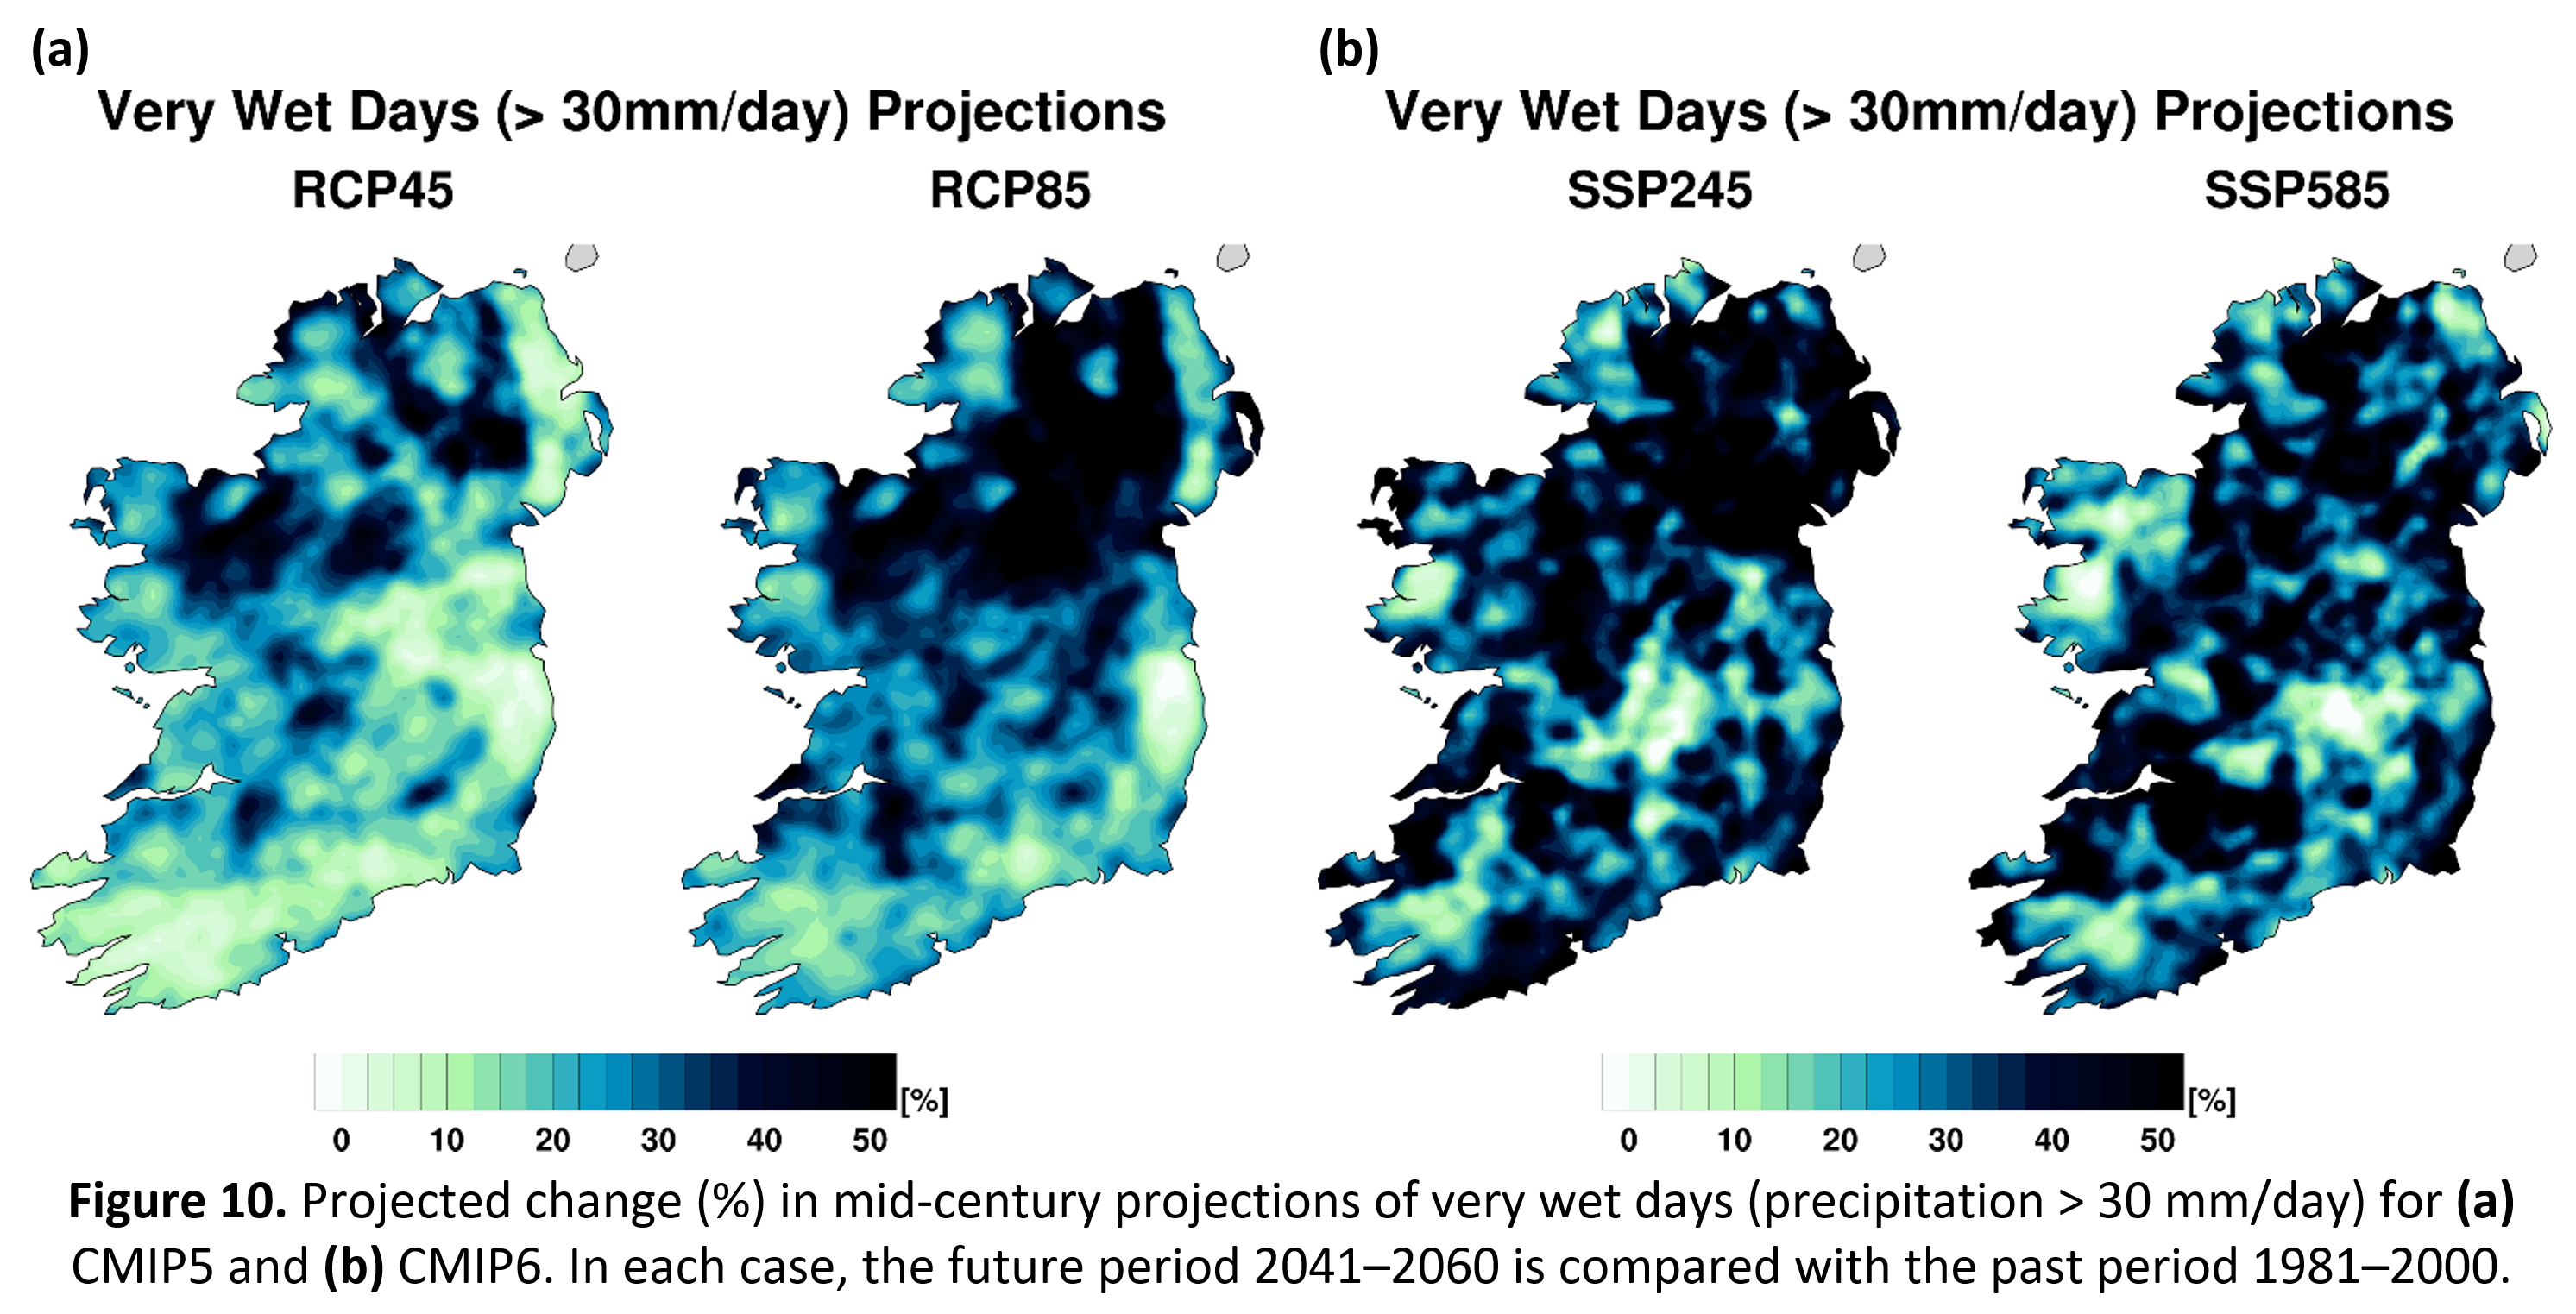 Figure 10. Projected change (%) in mid-century projections of very wet days (precipitation > 30 mm/day) for (a) CMIP5 and (b) CMIP6. In each case, the future period 2041–2060 is compared with the past period 1981–2000.